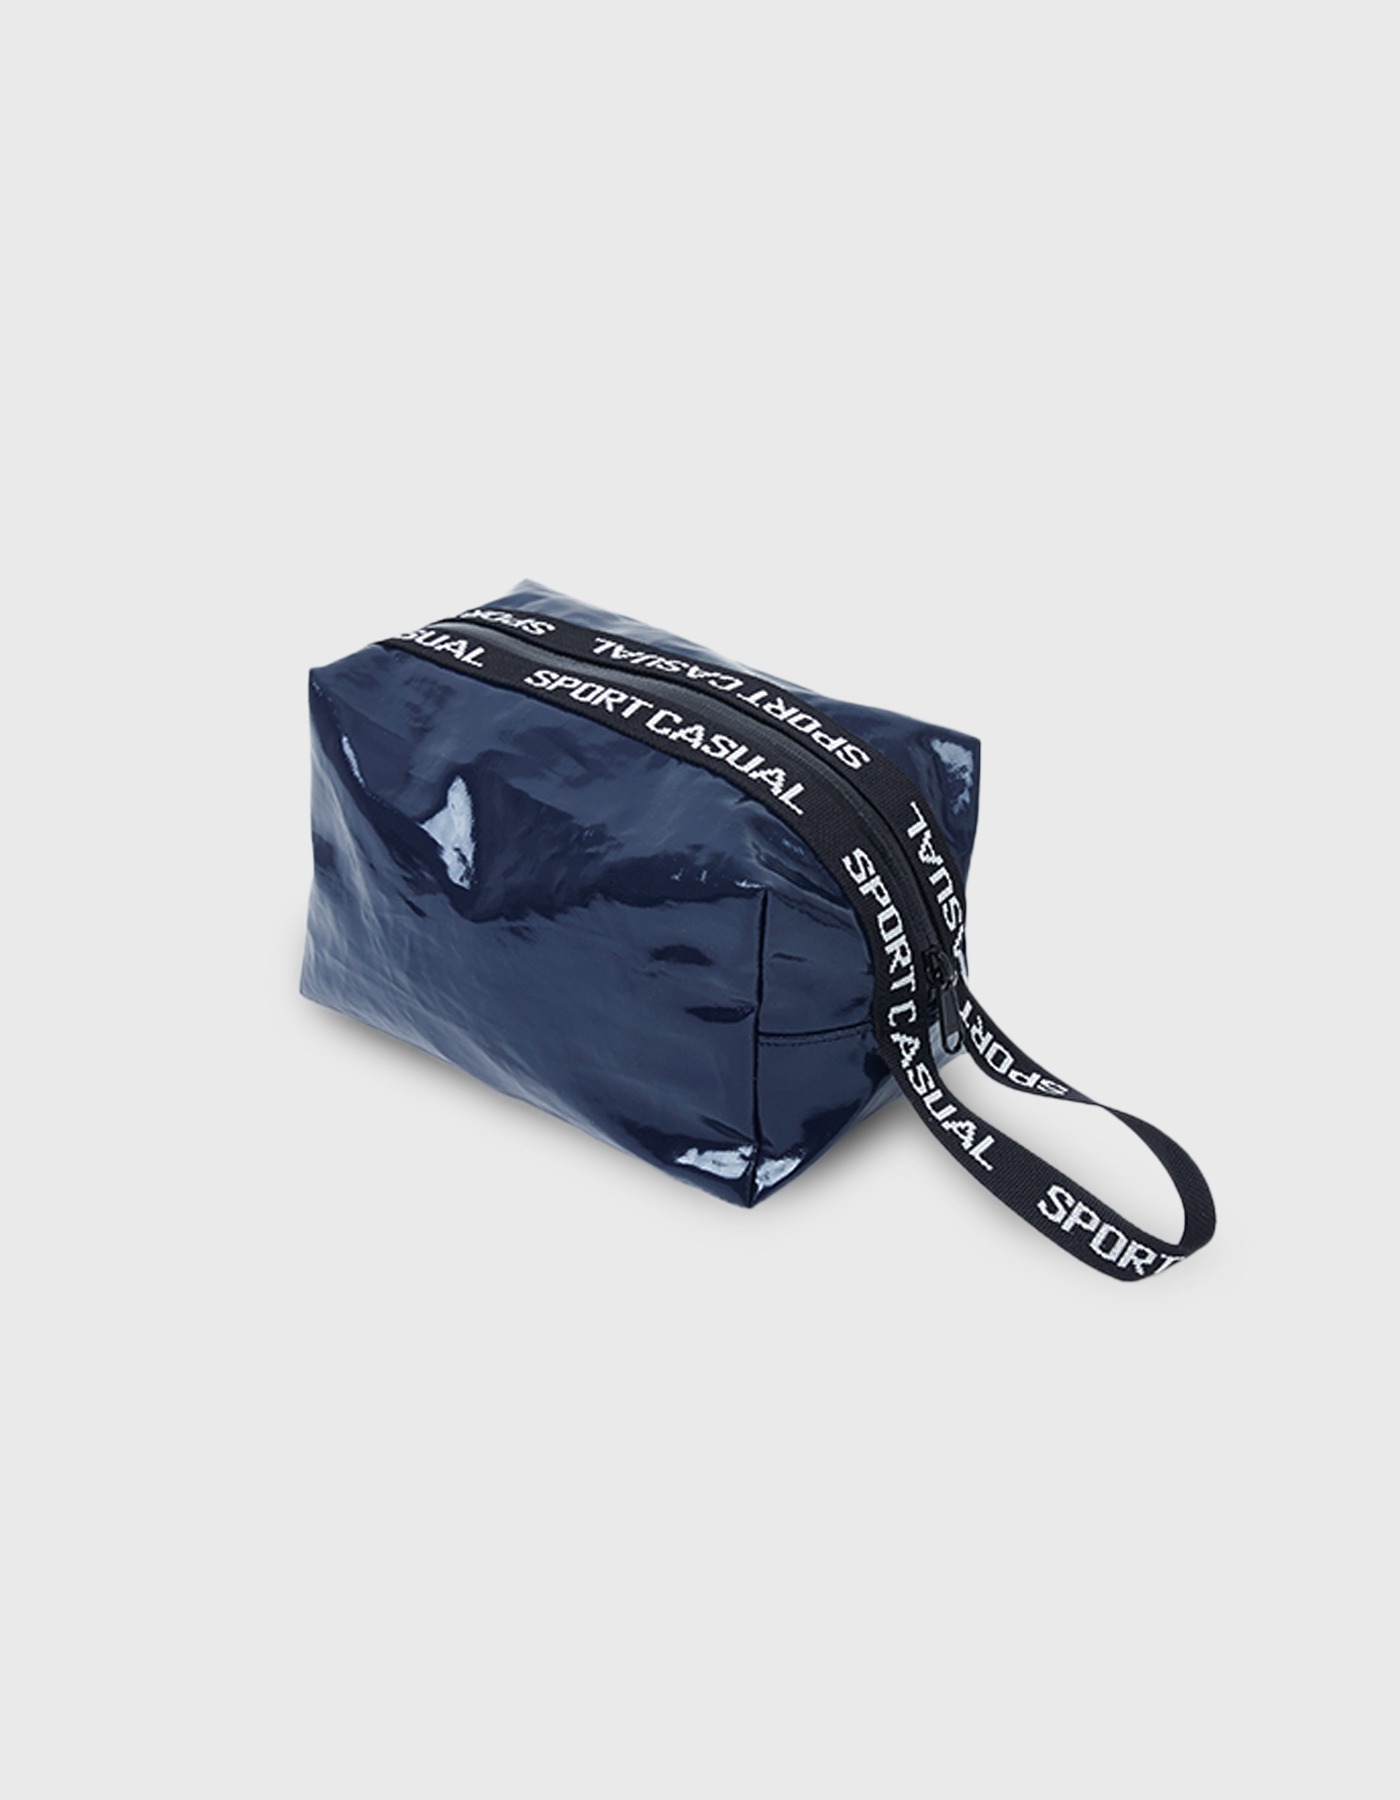 PATENT SPORTS POUCH / Navy